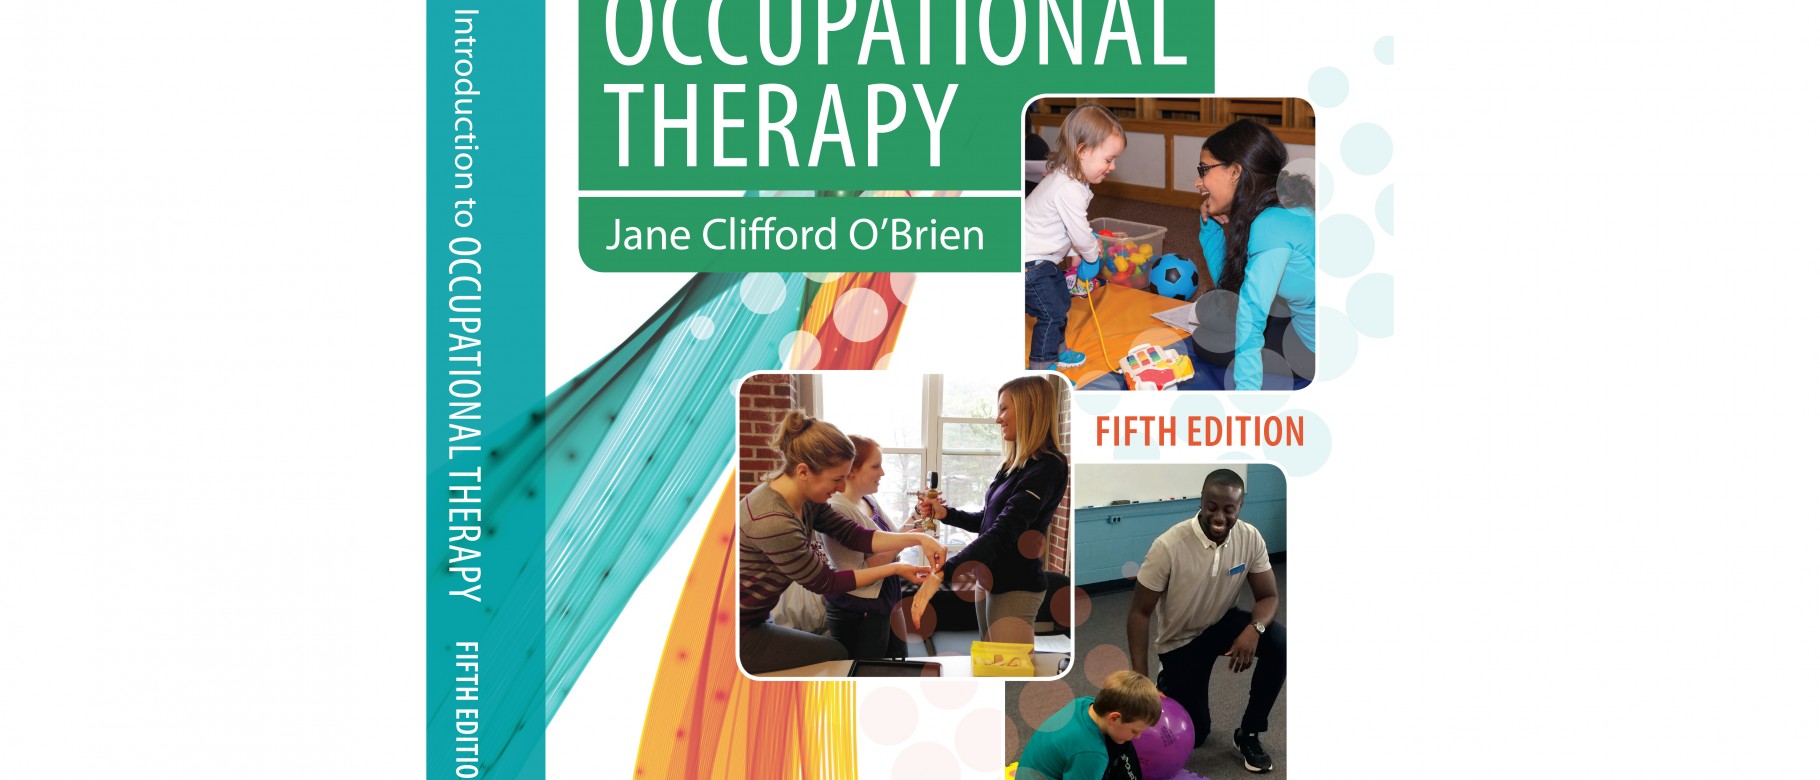 Introduction to Occupational Therapy 5th Edition